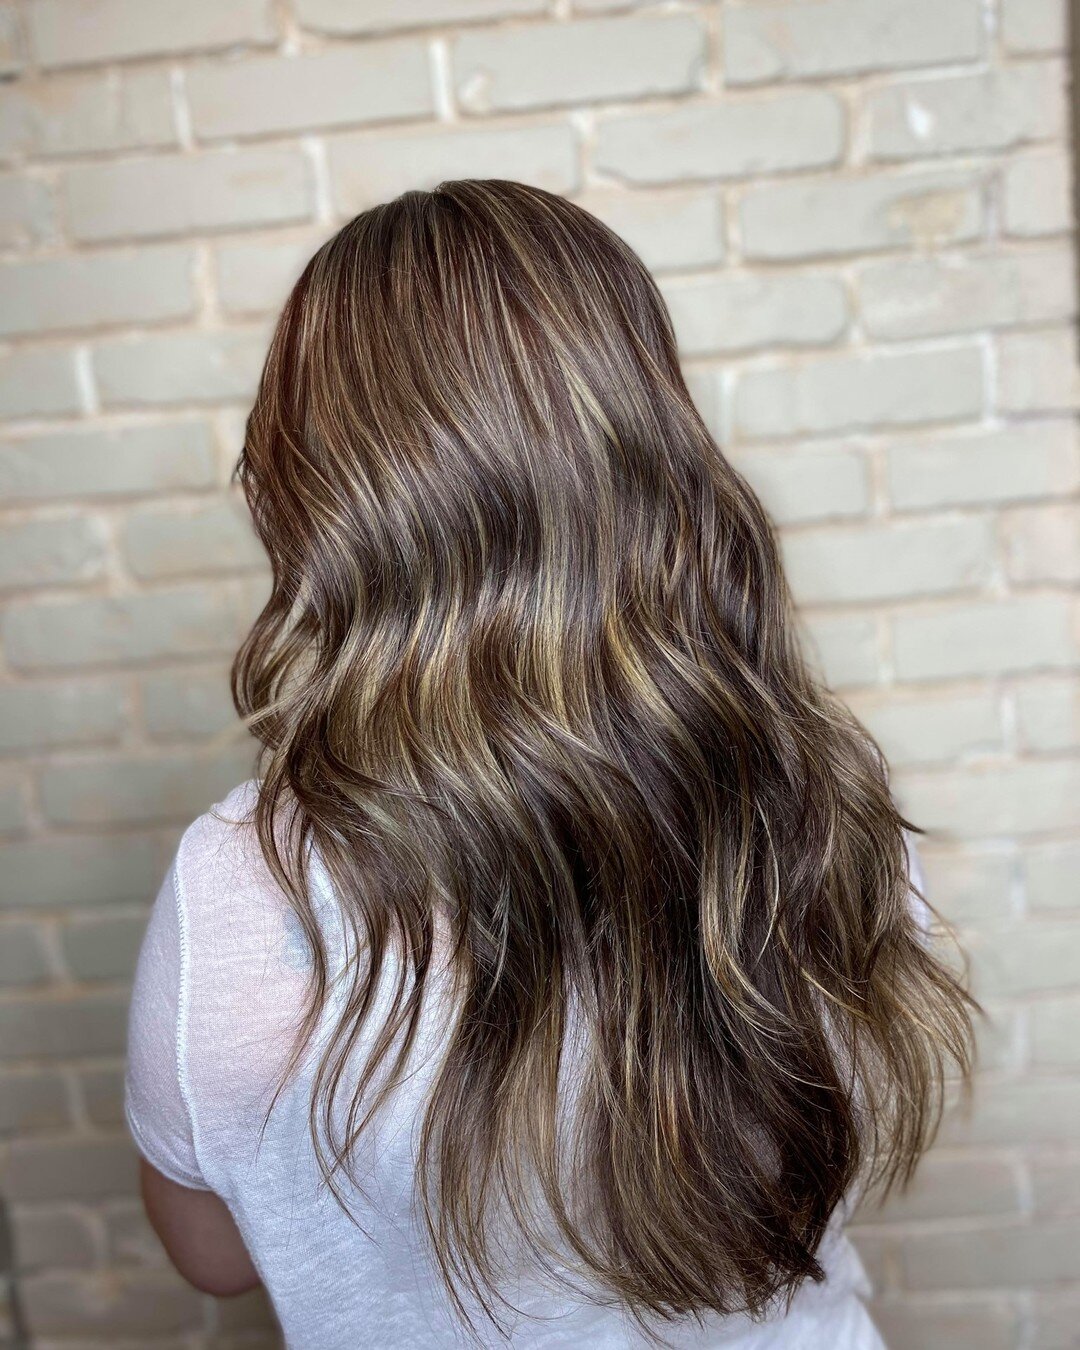 Need a little #REVAMP?🙌

Upgrade your existing hair color with a tone and blow dry (starting at a $65 upgrade to a hair cut by request.) ❤ This is the perfect way to boost your blow dry and leave feeling your very best!

#davinessalon #burlingtonspa